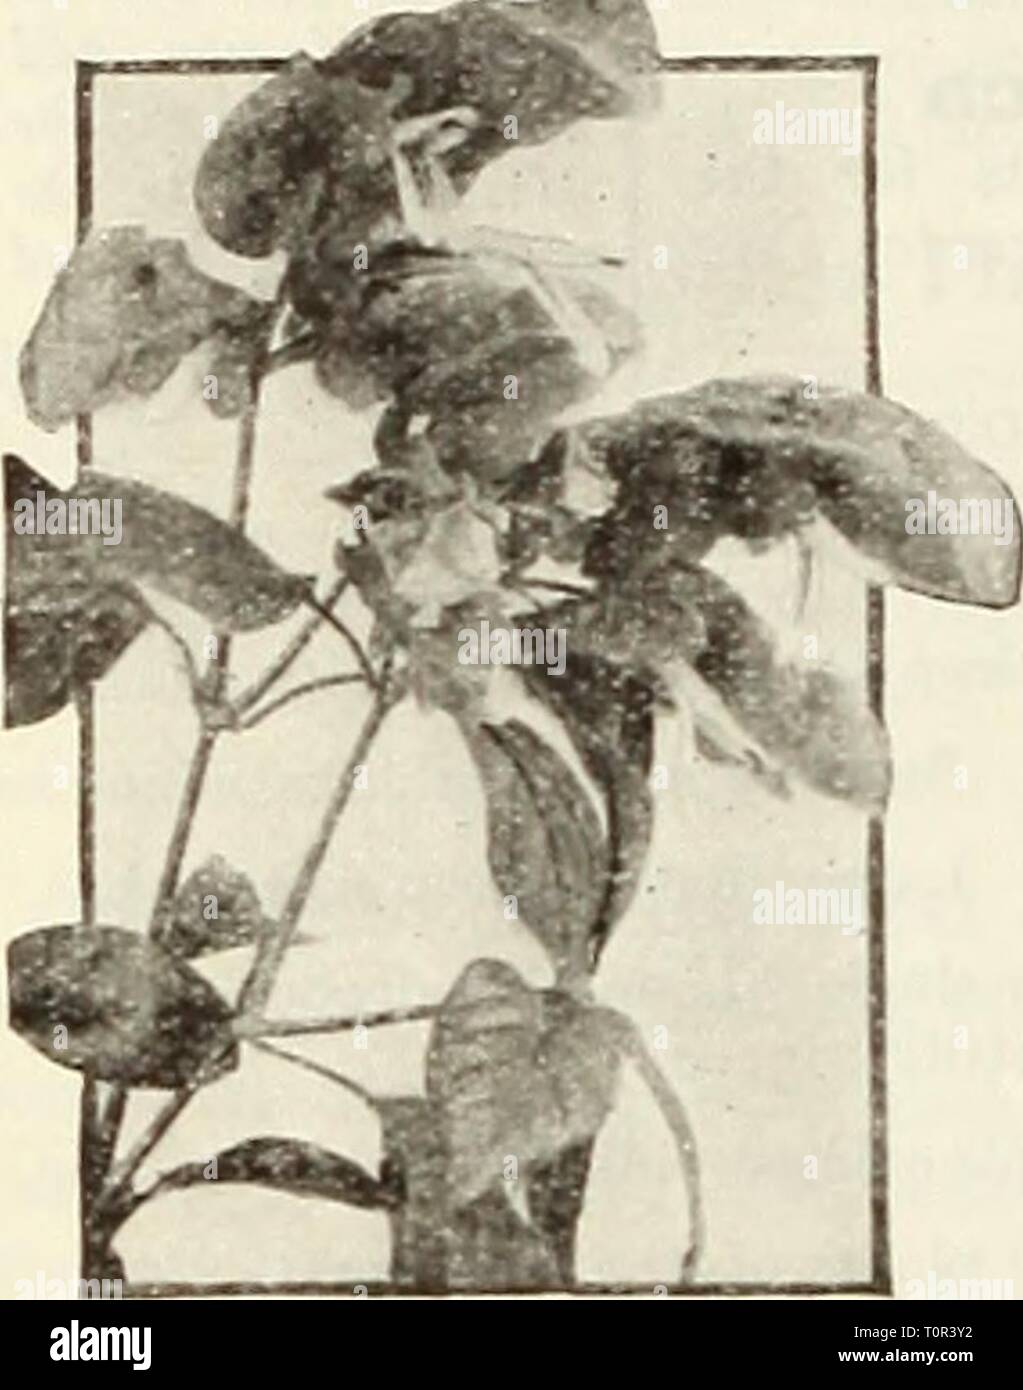 Dreer's bulbs  plants, shrubs, Dreer's bulbs : plants, shrubs, and seeds for fall planting  dreersbulbsplant1936henr Year: 1936  FLOWERING AND DECORATIVE PLANTS—Continued Beloperone guttata—Shrimp Plant    The inflorescence of Bel- operone is composed of a series of overlapping bracts or floral leaves. These bracts assume a rich golden bronze tint when the plant is exposed to full light and the two-lipped white flowers are produced successivelj' between these bracts. The lower lip of the flower has a tessellated marking of pale purple, while the upper lip forms a hood over the dark stamens. A  Stock Photo